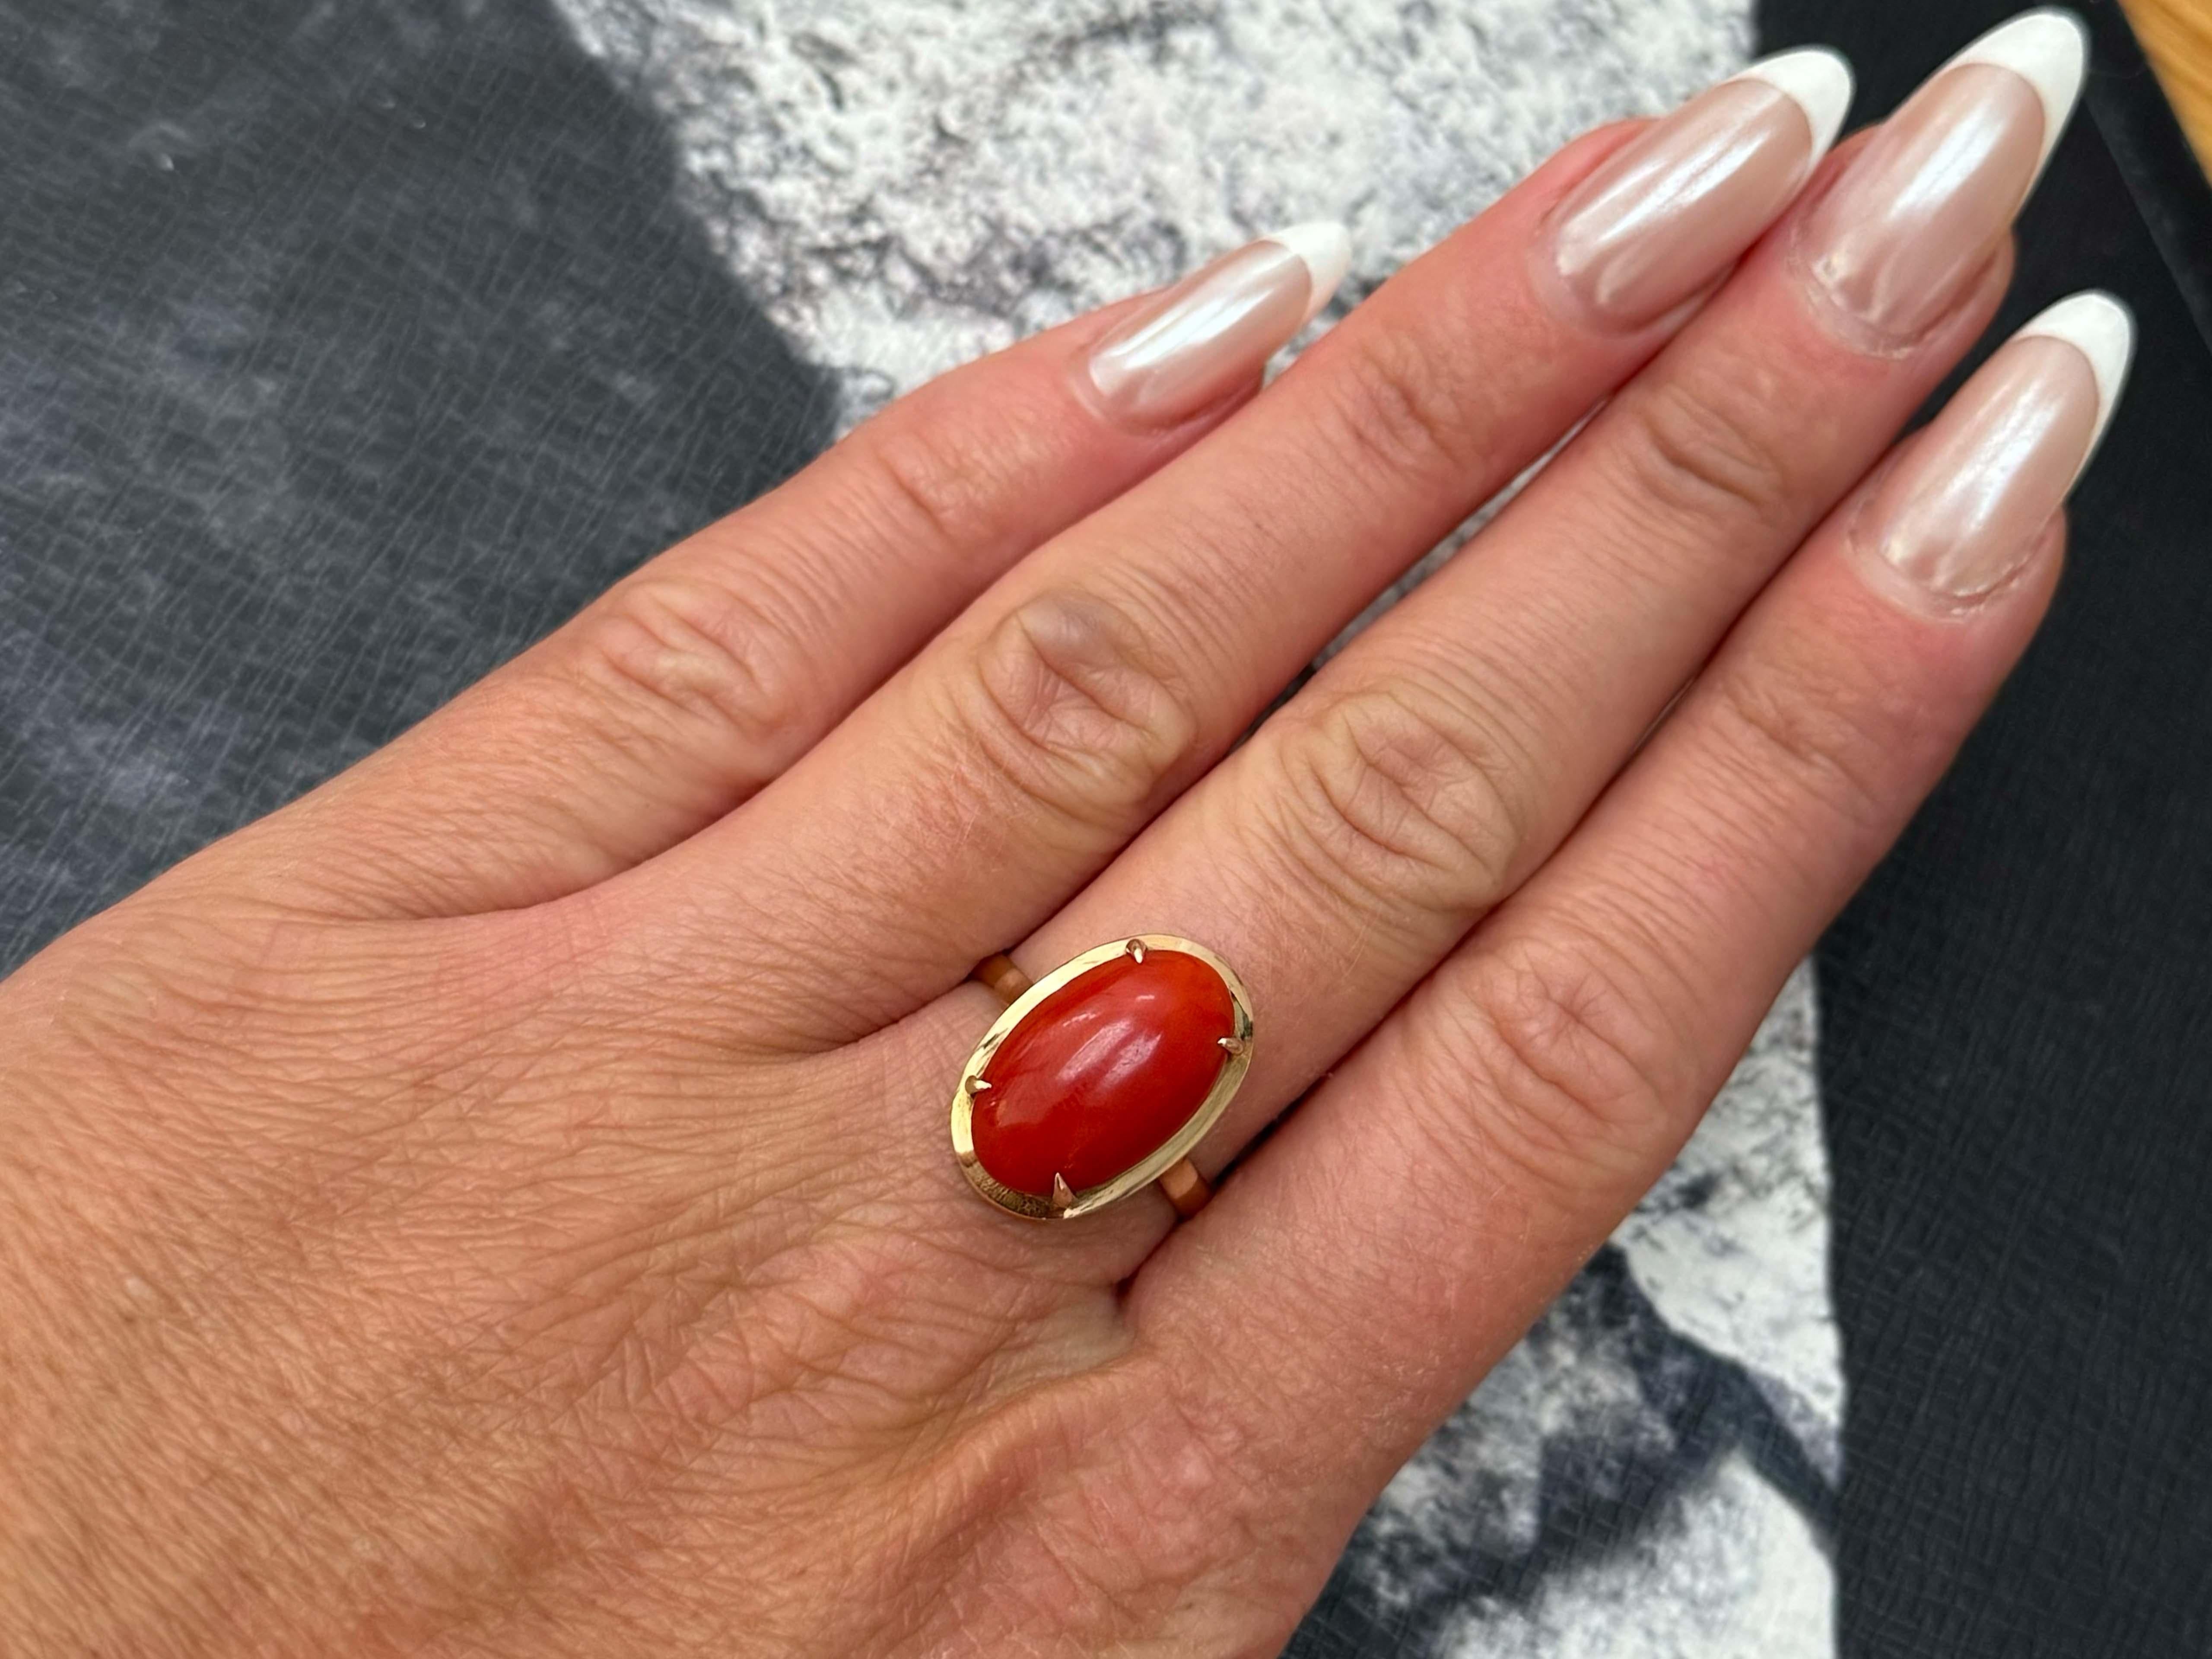 Item Specifications:

Metal: 14K Yellow Gold

Ring Size: 8.5 (resizing available for a fee)

Total Weight: 4.0 Grams

Aka Coral Specifications:

Shape: oval

Coral Measurements: 16.5 mm x 10.2 mm x 4.95 mm

Condition: Preowned, Excellent

Stamped: